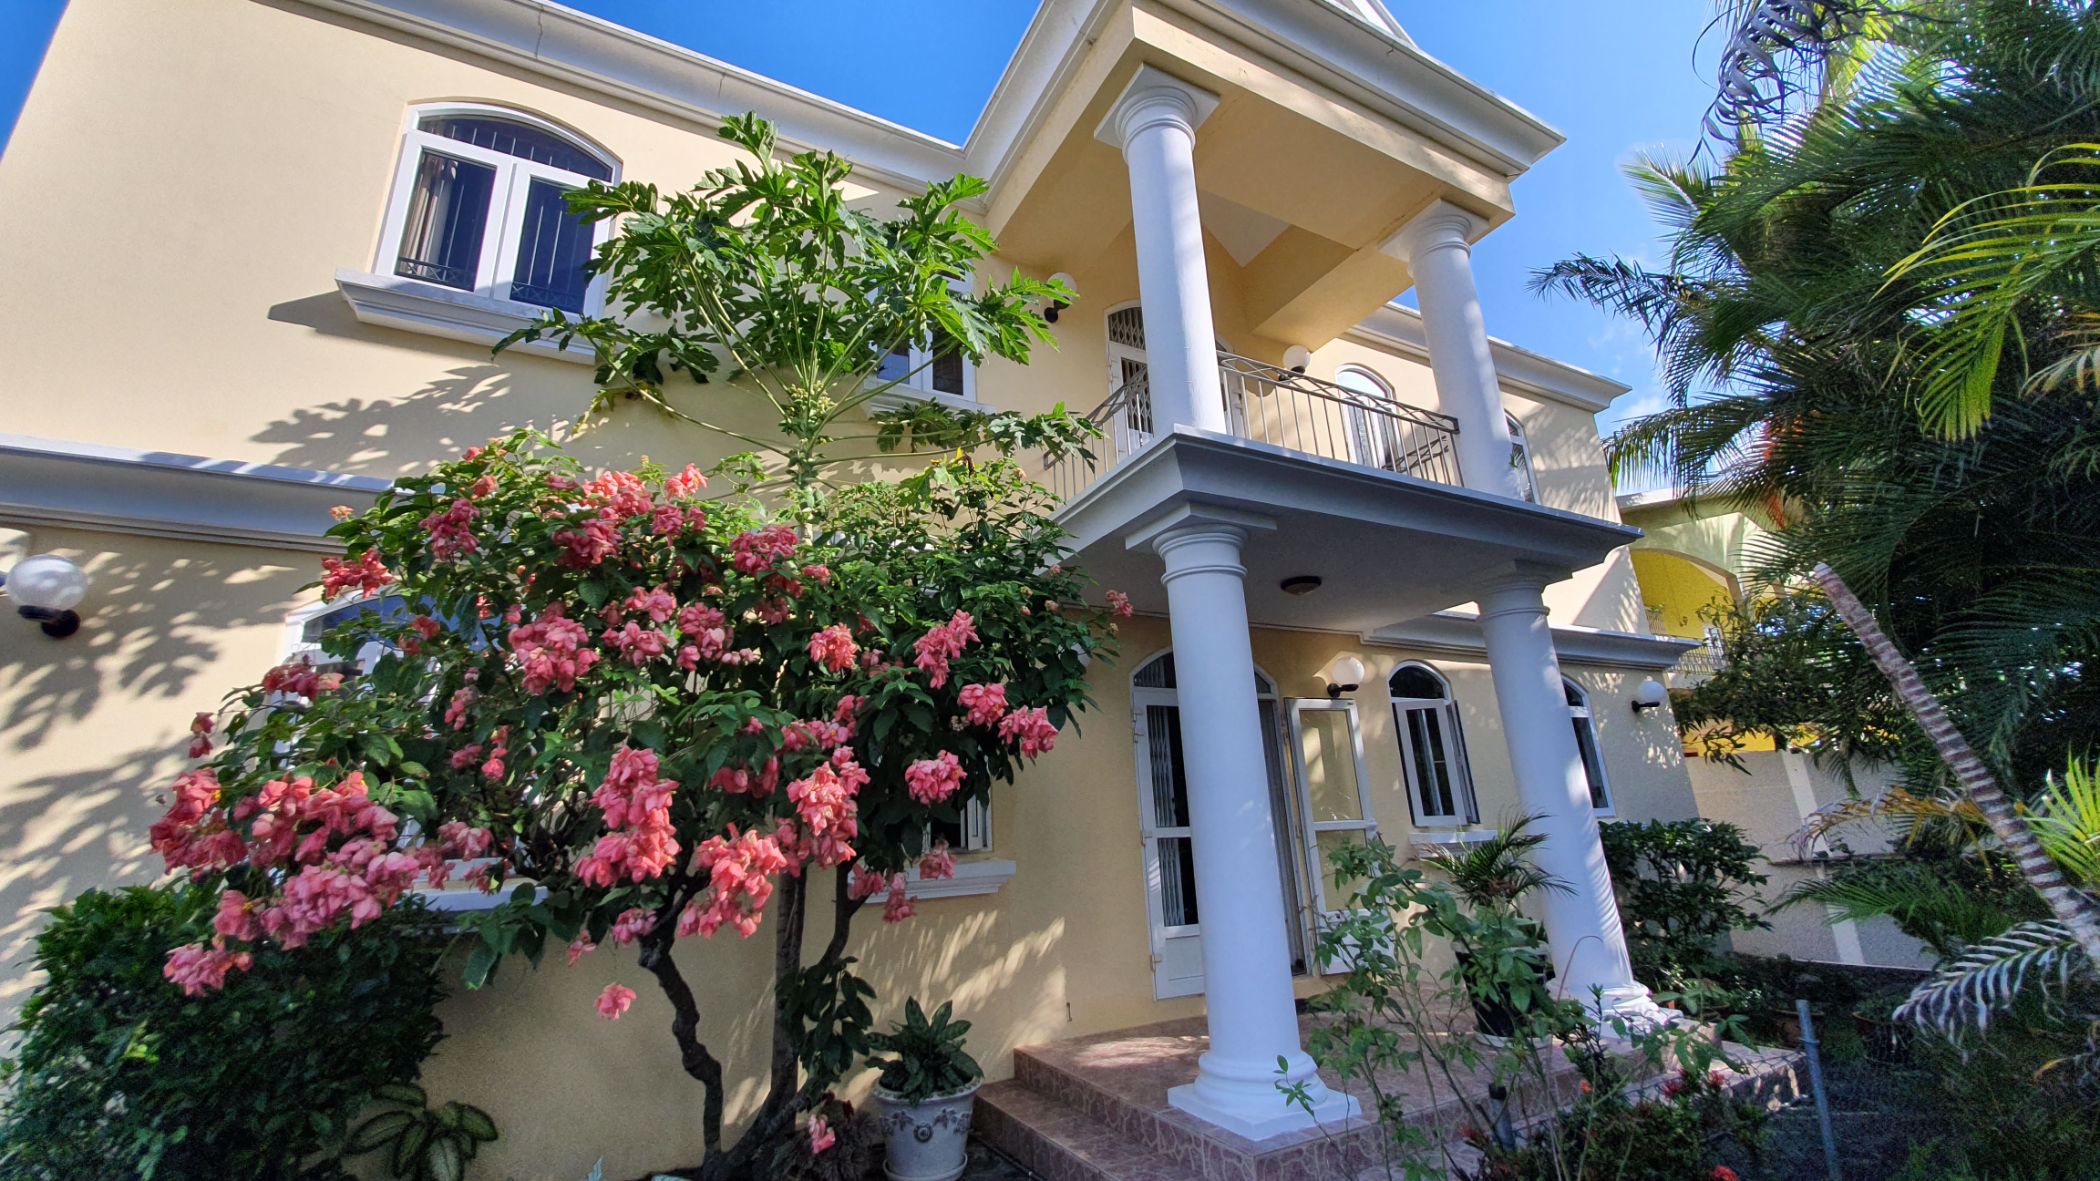 5 bedroom house for sale in Pereybere (Mauritius)